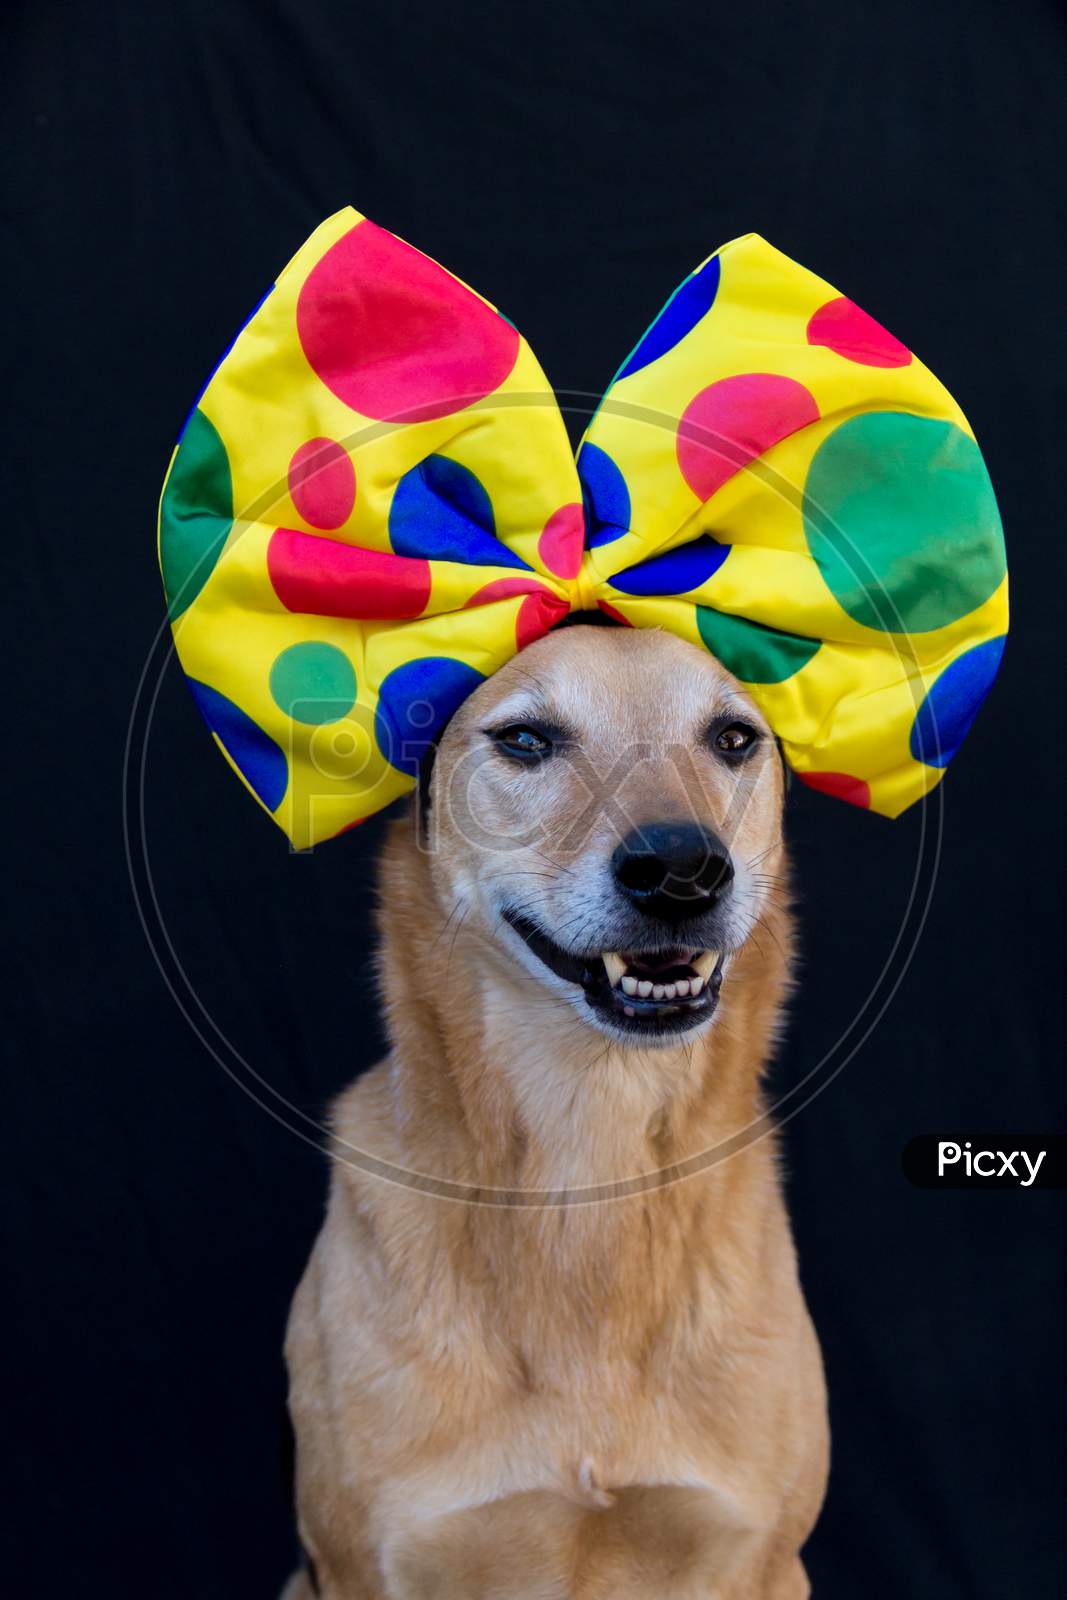 Portrait Of Dog With A Big Polka Dot Bow On His Head